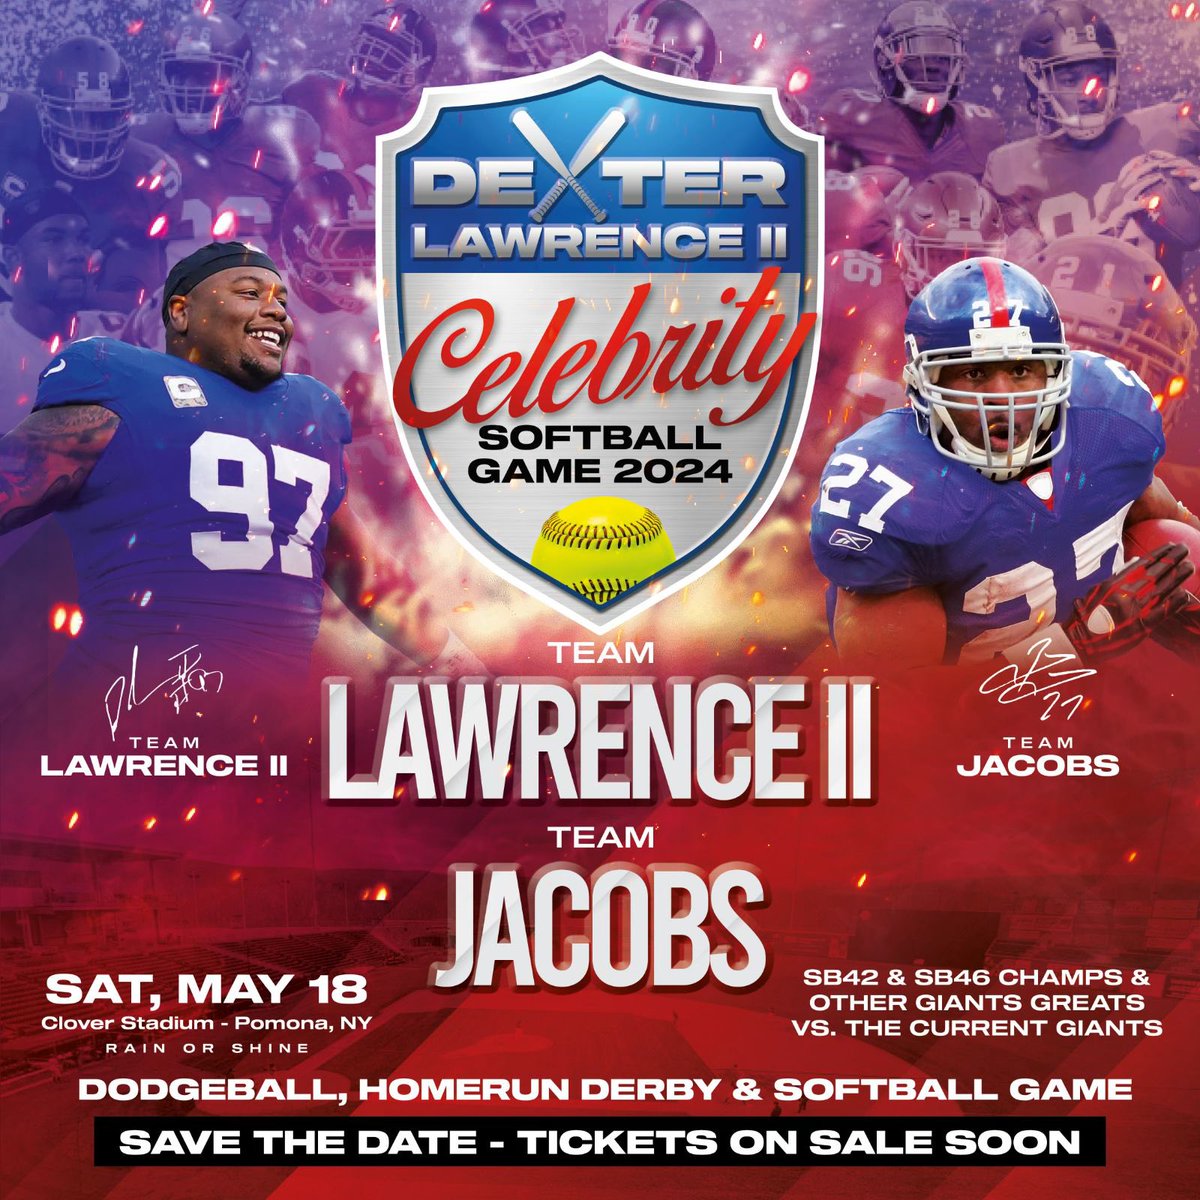 SAVE THE DATE: The Dexter Lawrence II celebrity softball game 5/18/24. Me & my SB 42&46 teammates & other NYG greats vs @llawrencesexy & the current Giants in dodgeball, homerun derby & softball. Tix on sale soon. Interested in Sponsorship/Vendors table contact: Lpgnyg@gmail.com